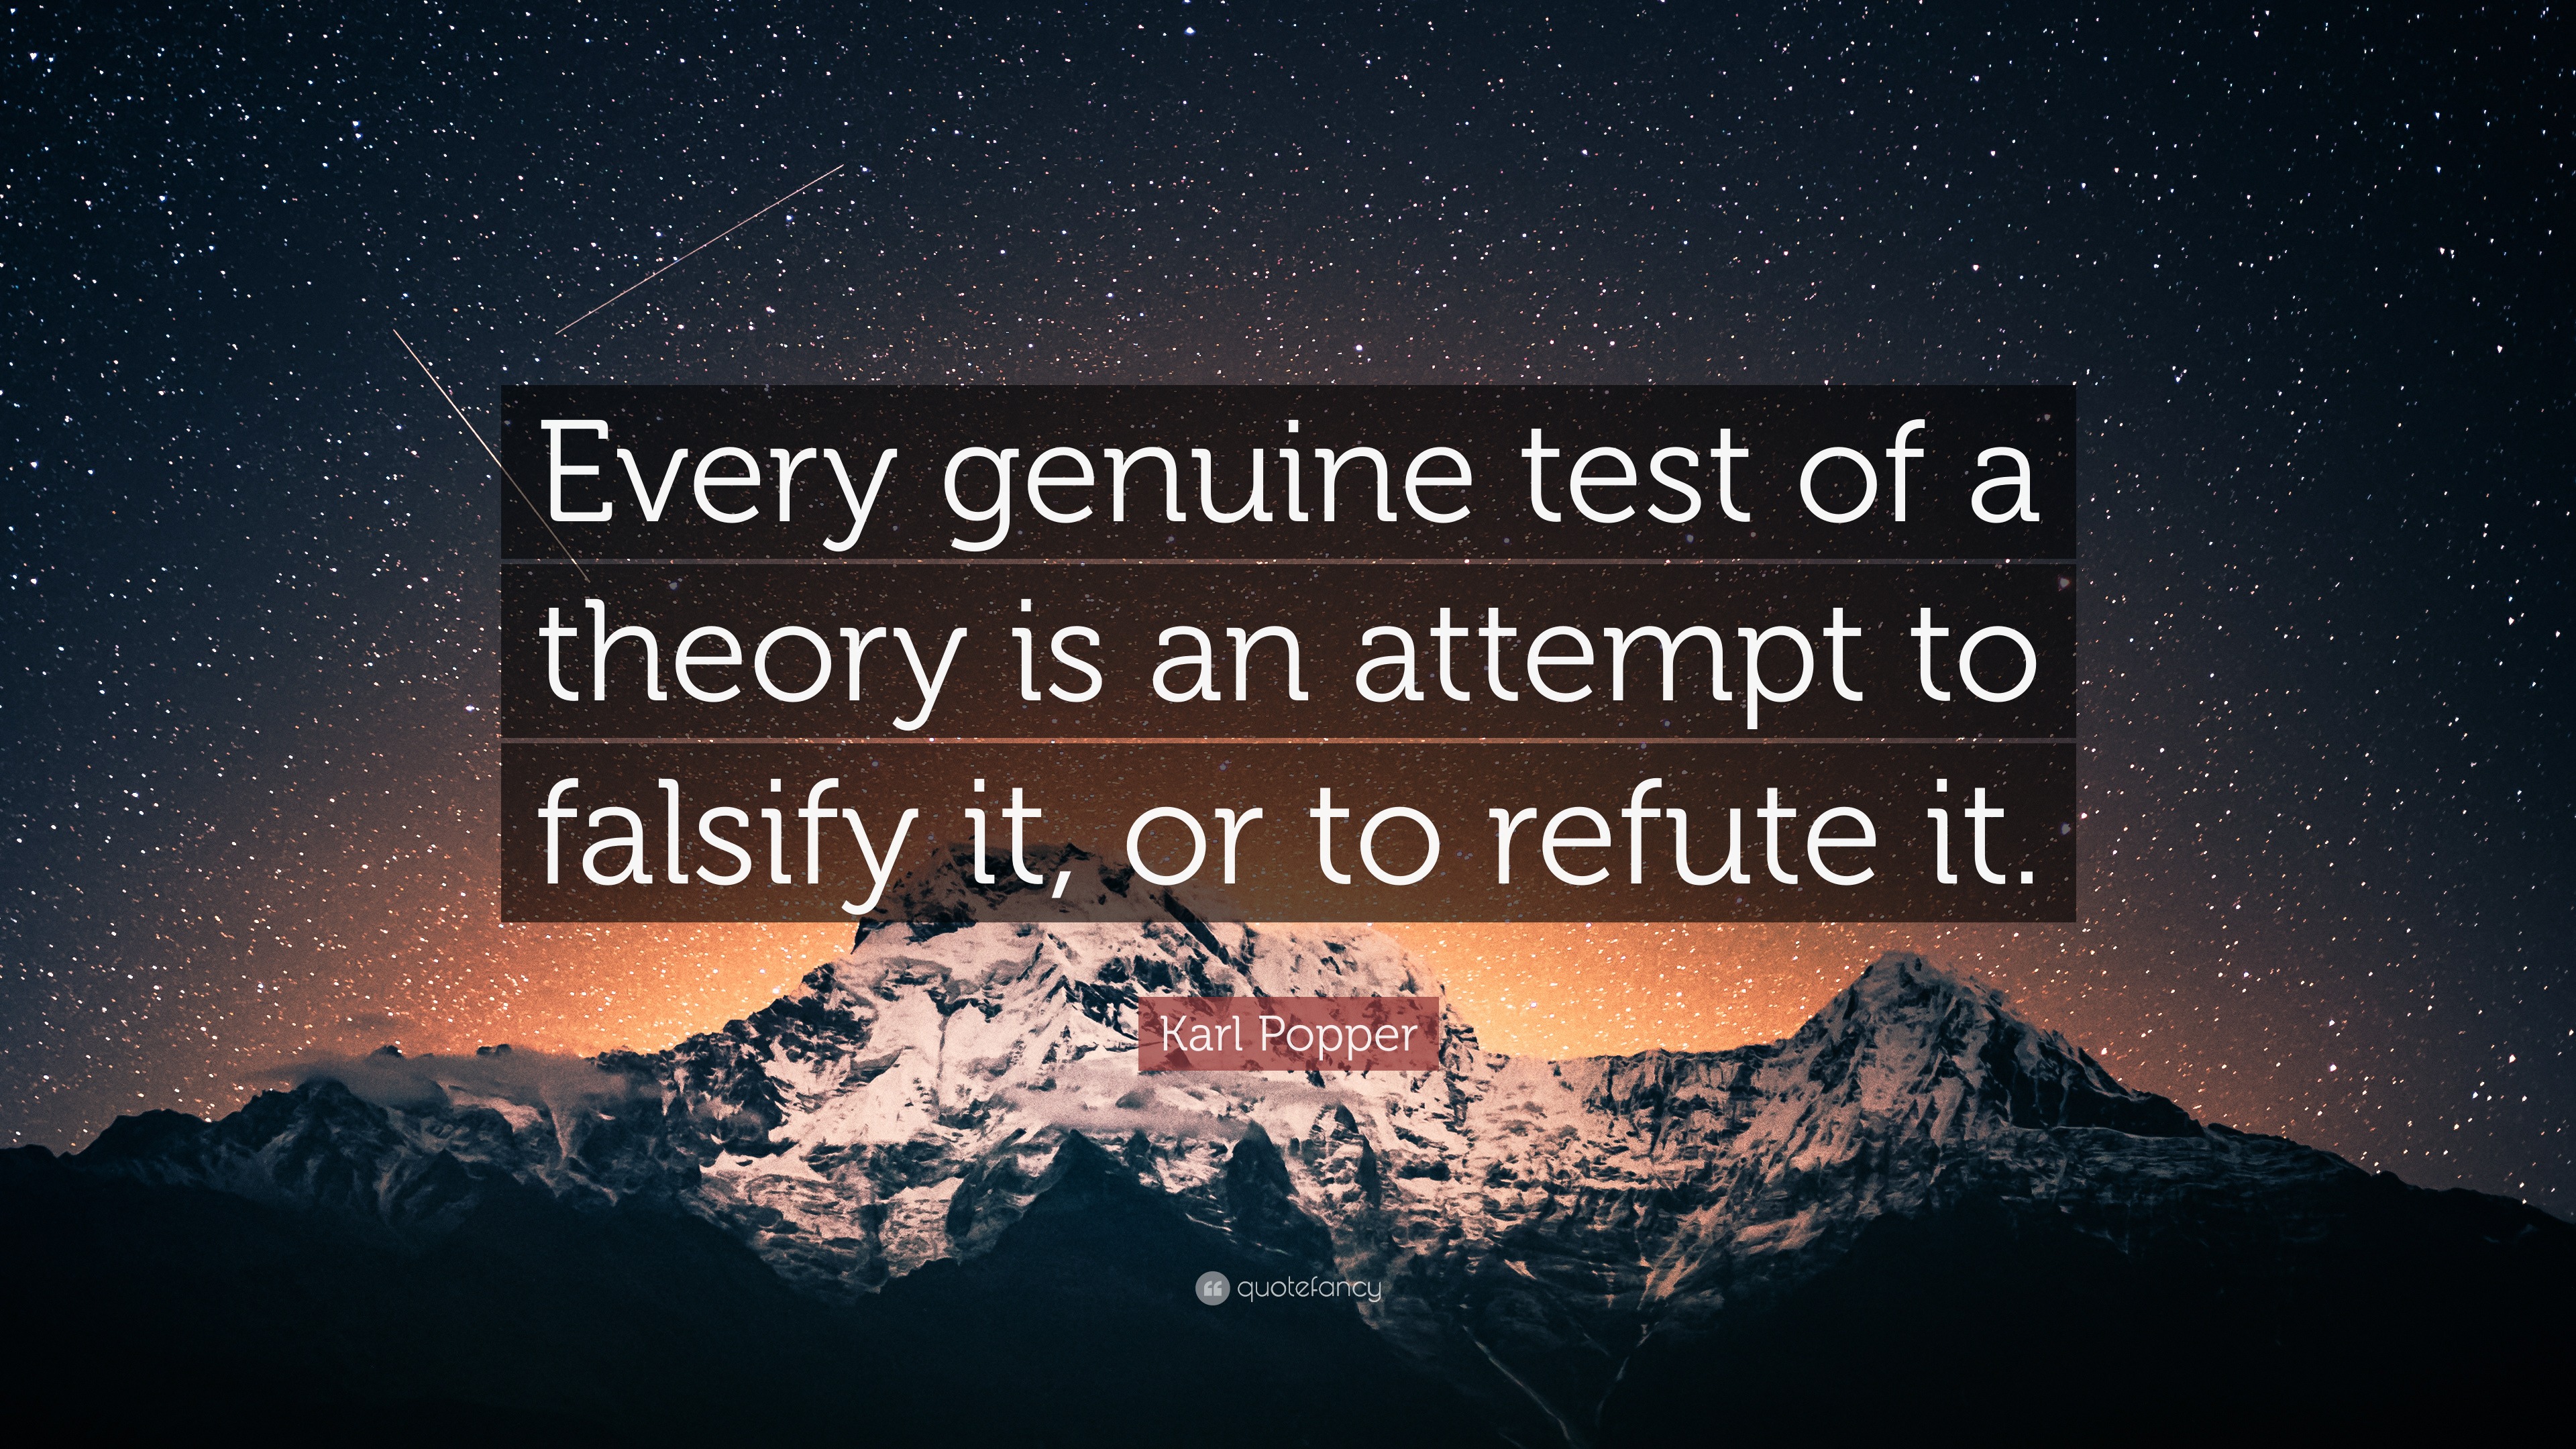 statsminister badminton tjene Karl Popper Quote: “Every genuine test of a theory is an attempt to falsify  it, or